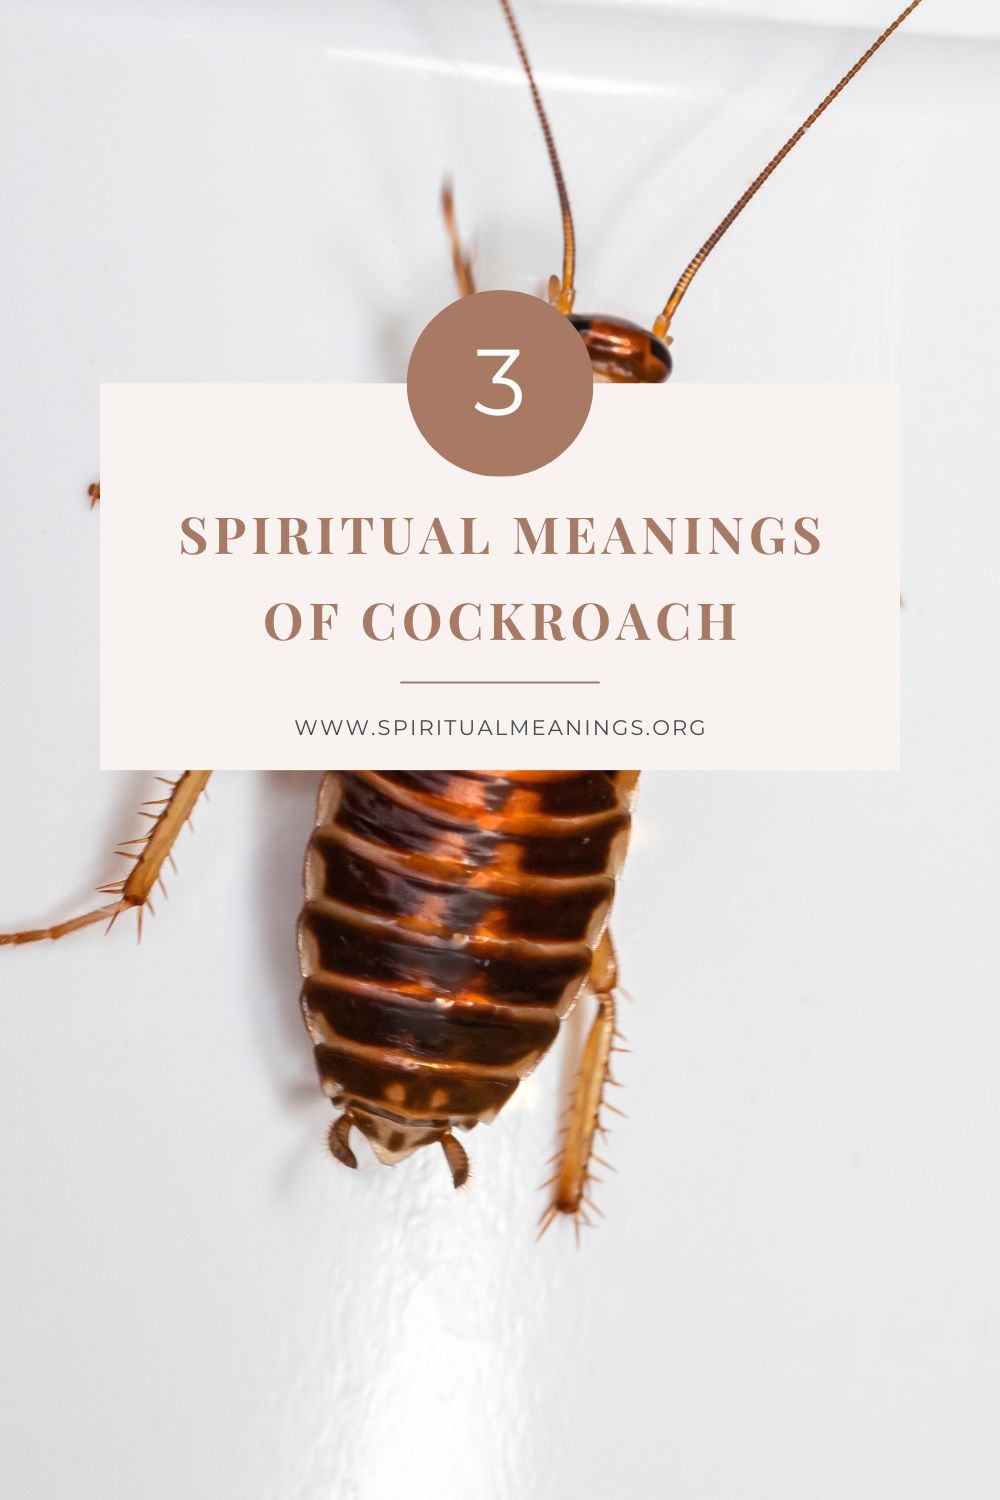 Spiritual Meanings of Cockroach